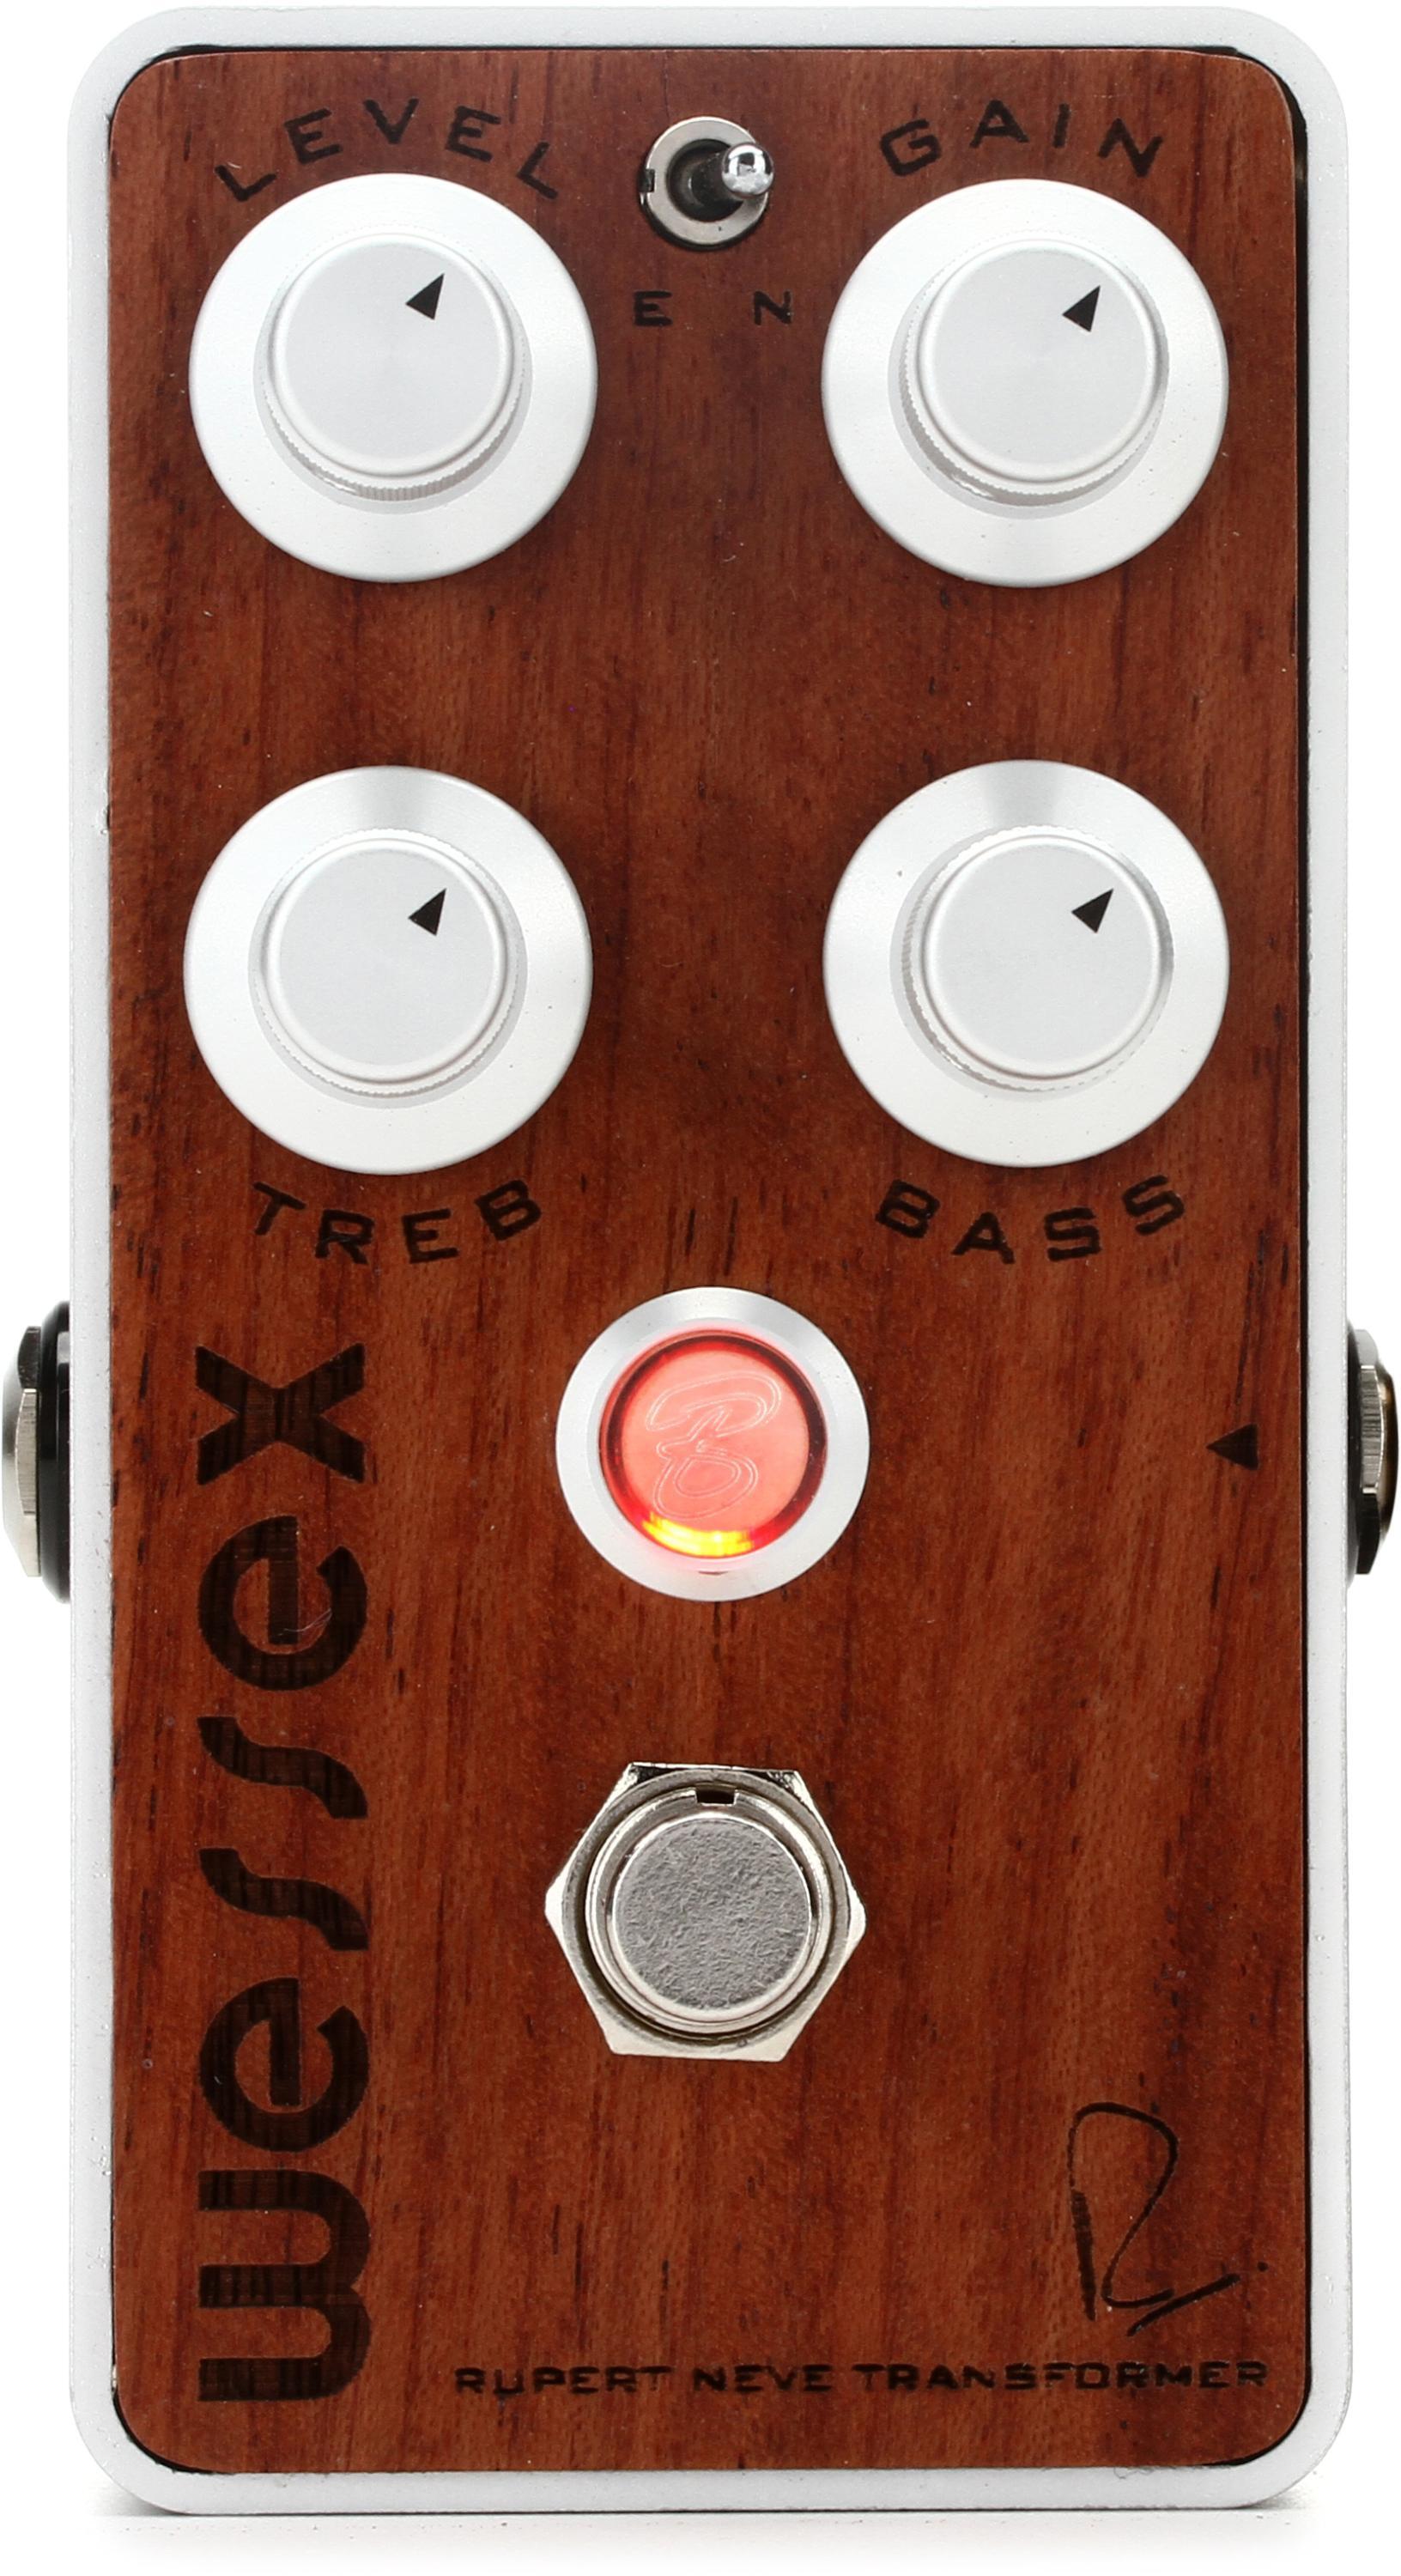 Bogner Wessex Overdrive Pedal - Bubinga Faceplate | Sweetwater